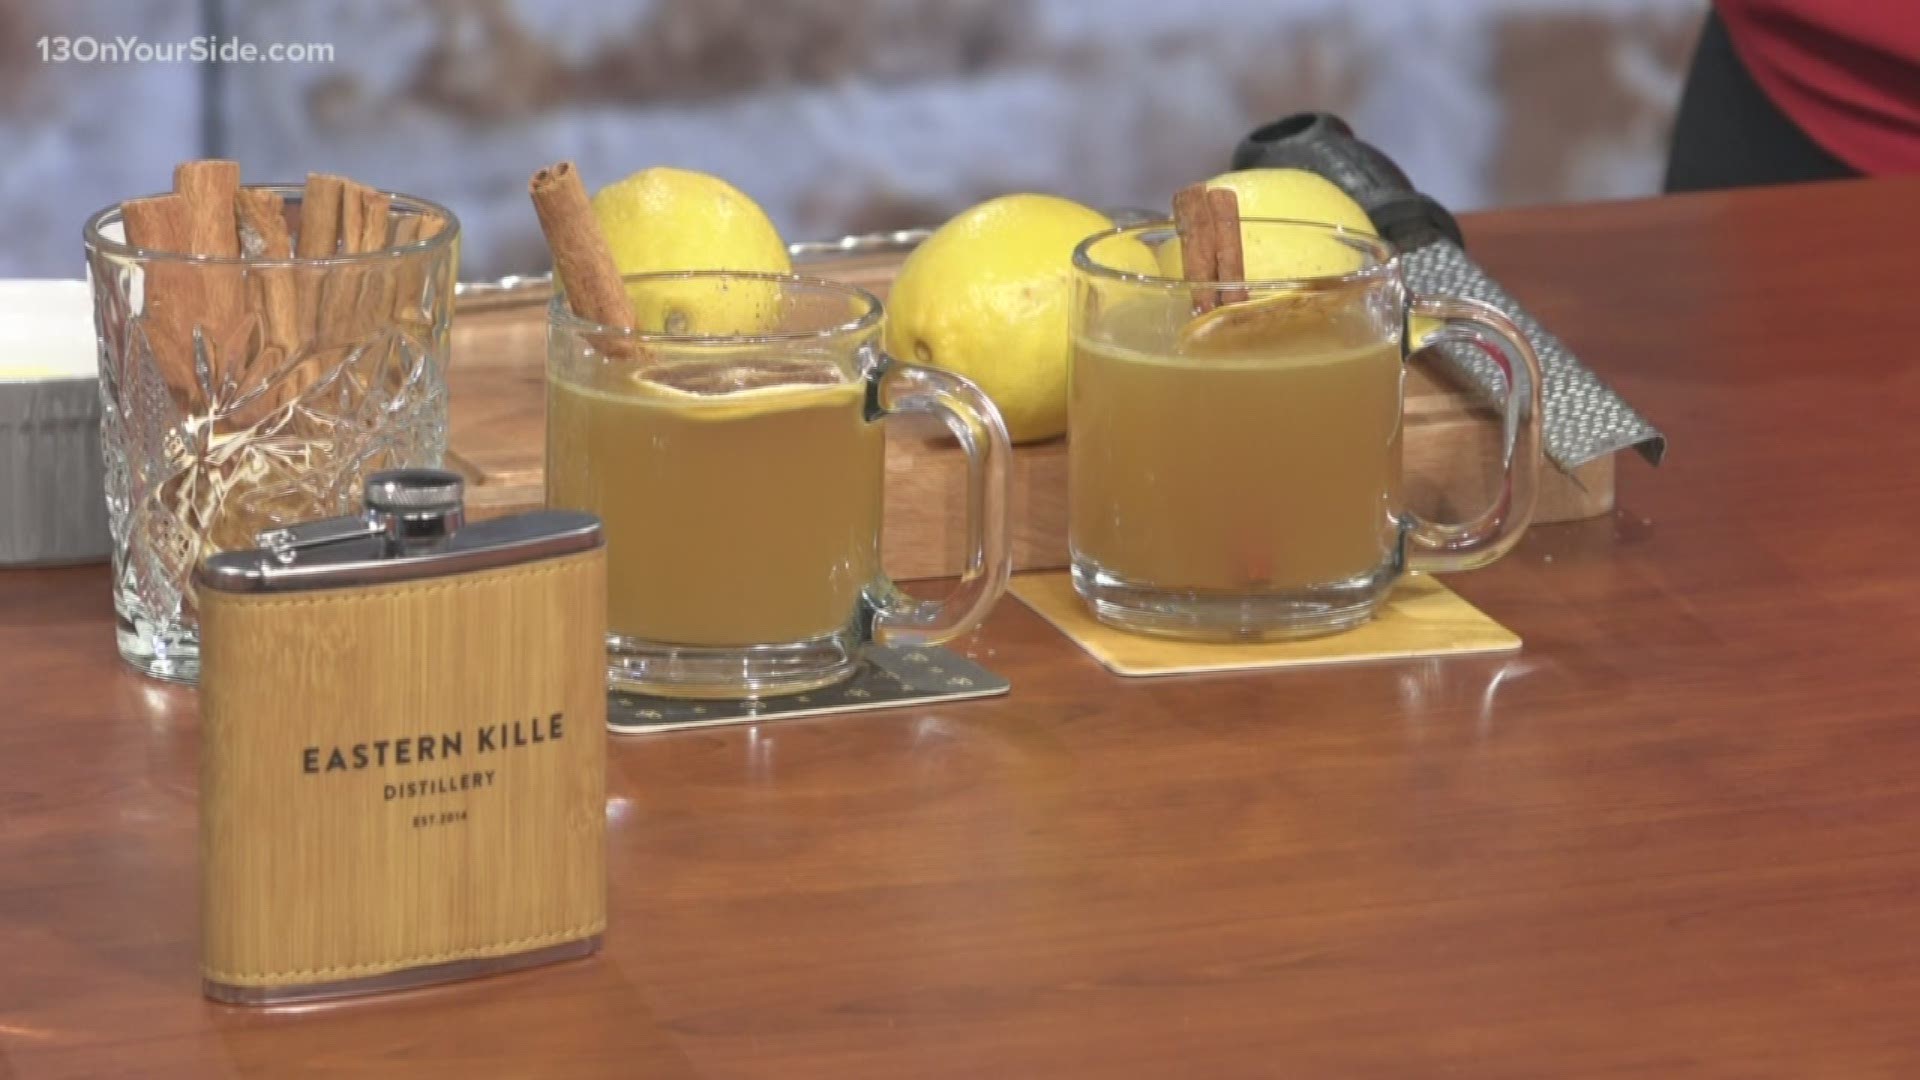 Learn how to make a deliciously festive holiday cocktail from Eastern Kille Distillery (former Gray Skies).